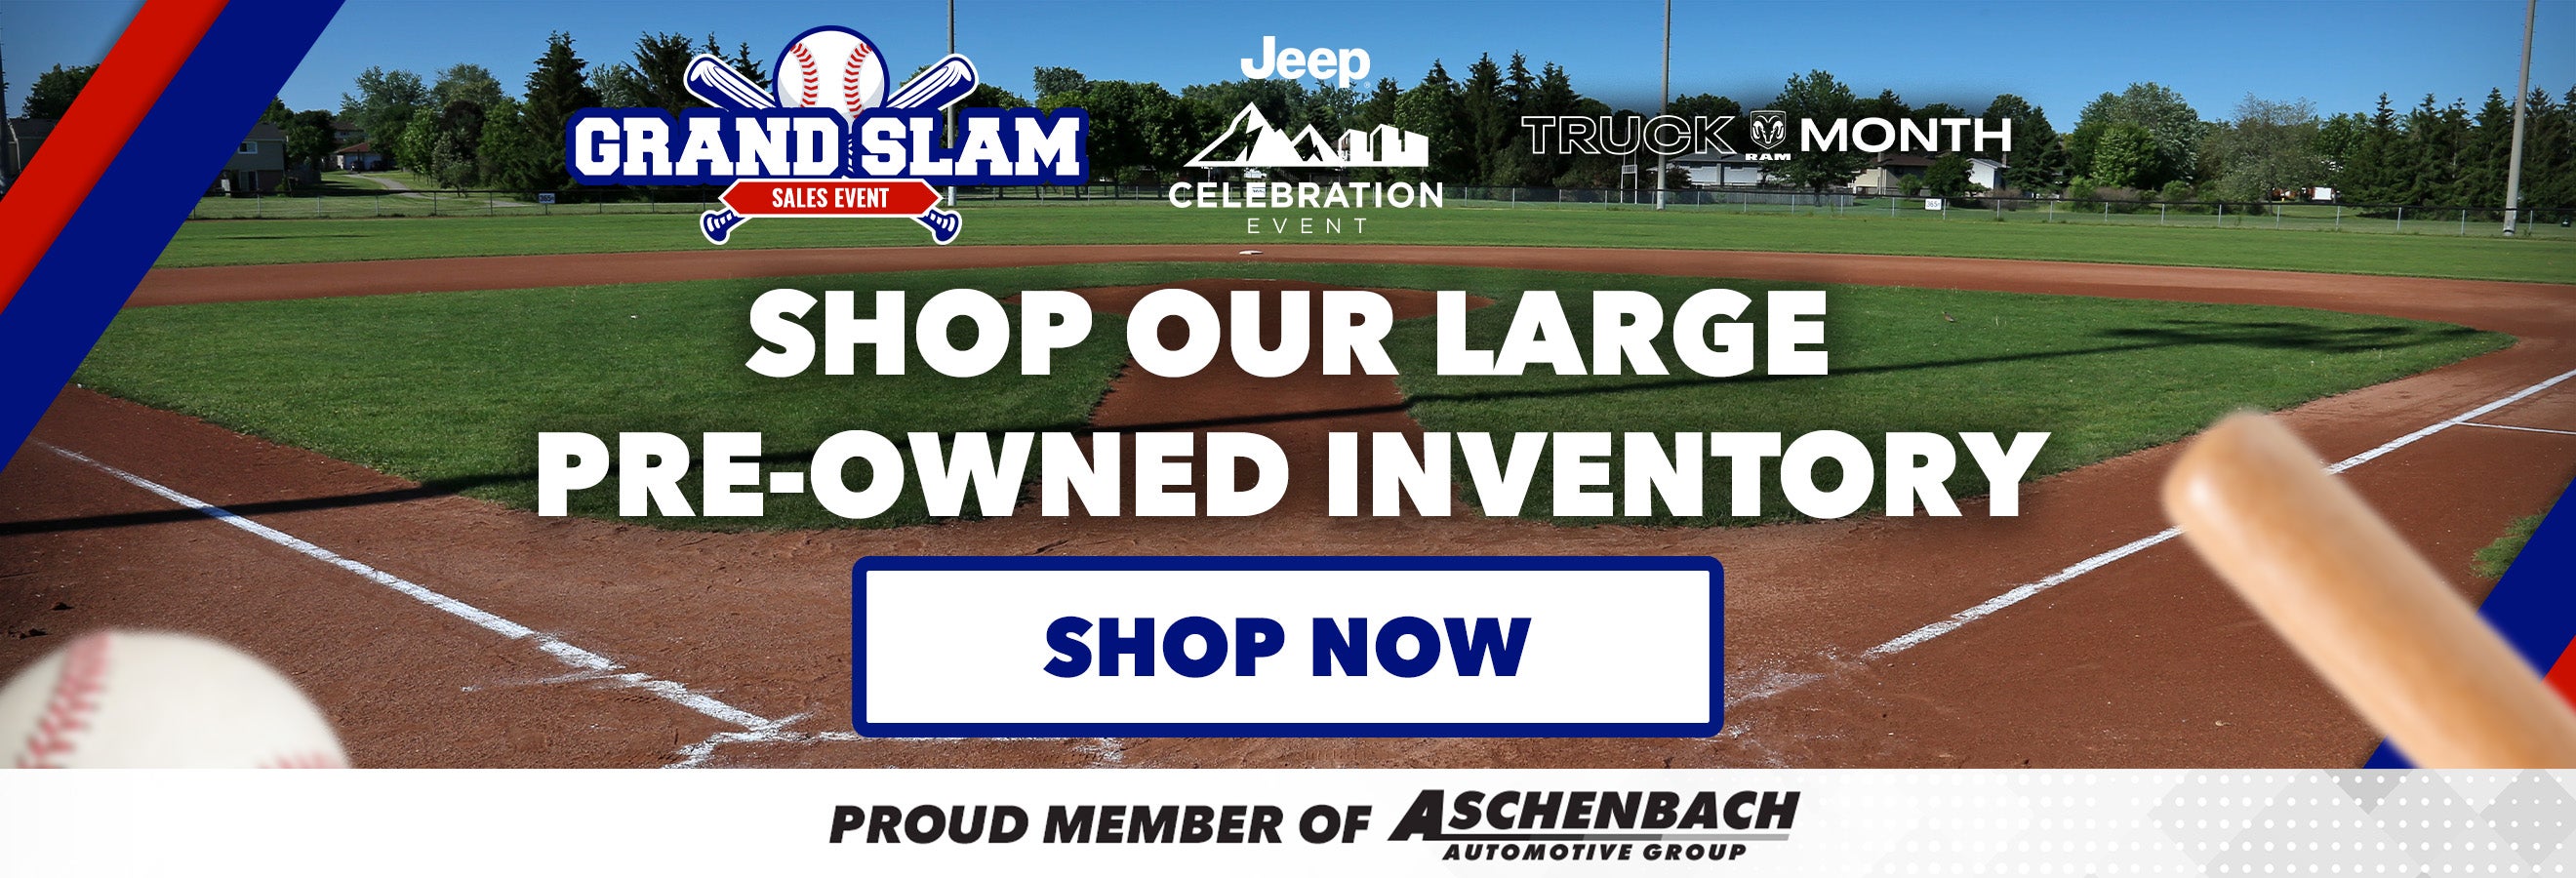 Shop Our Large Pre-Owned Inventory